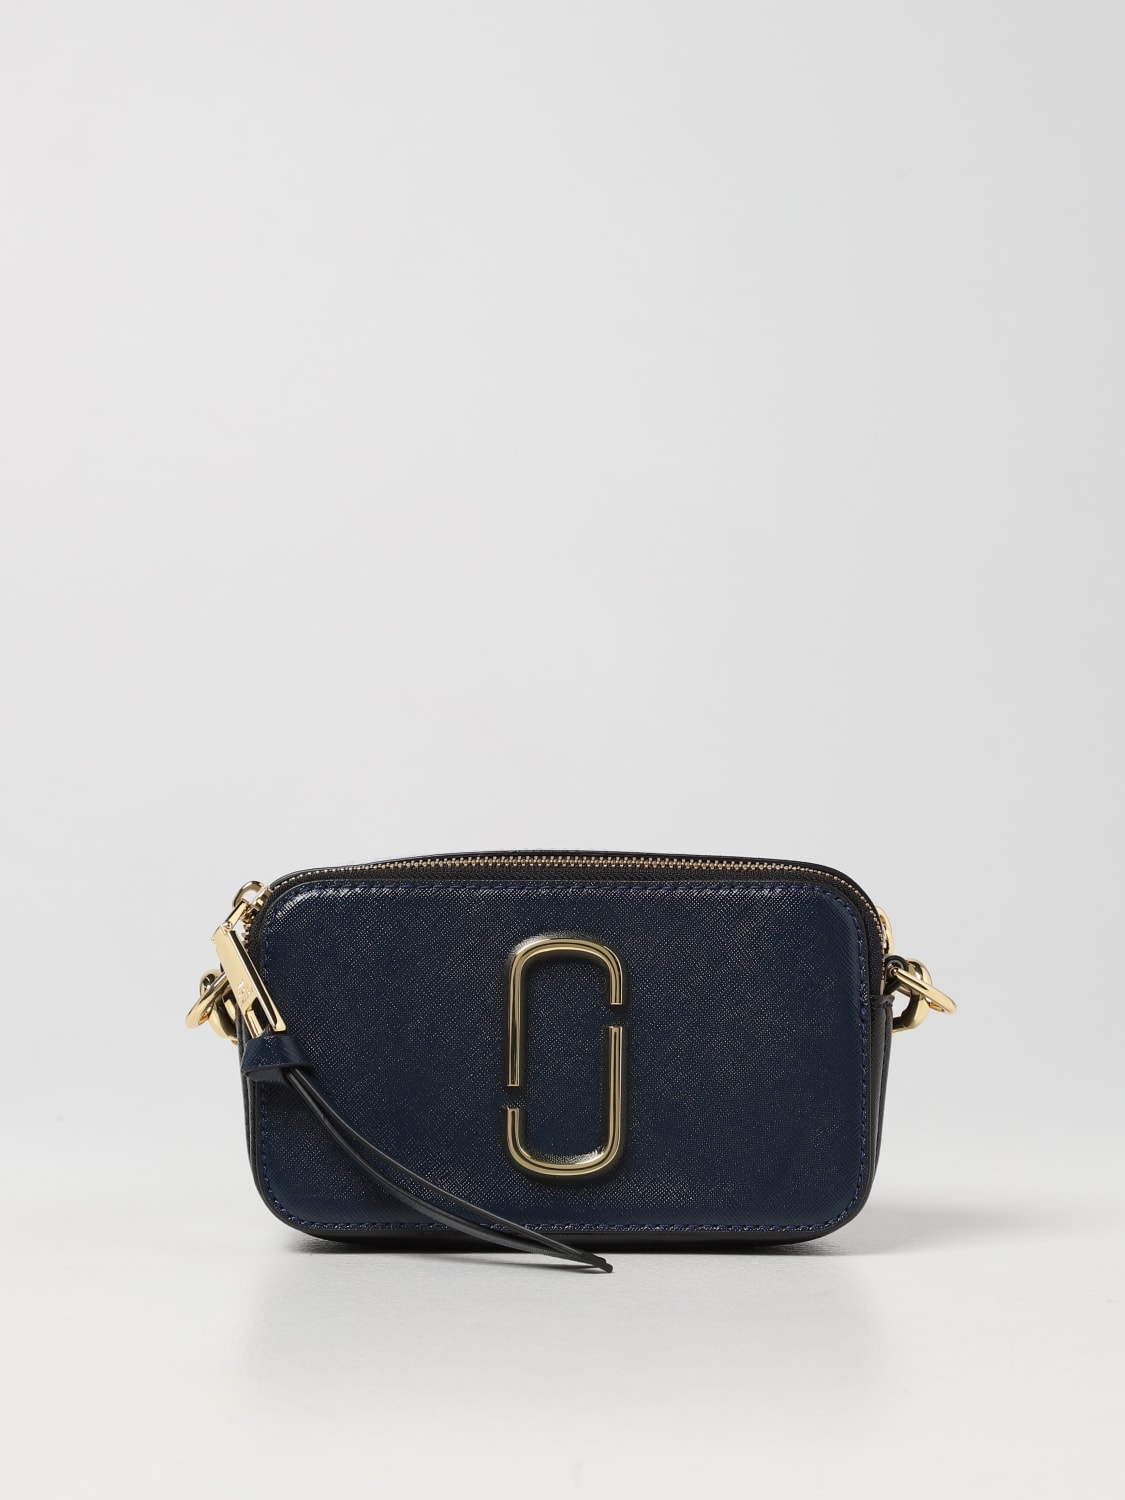 Cross body bags Marc Jacobs - Snapshot saffiano leather camera bag